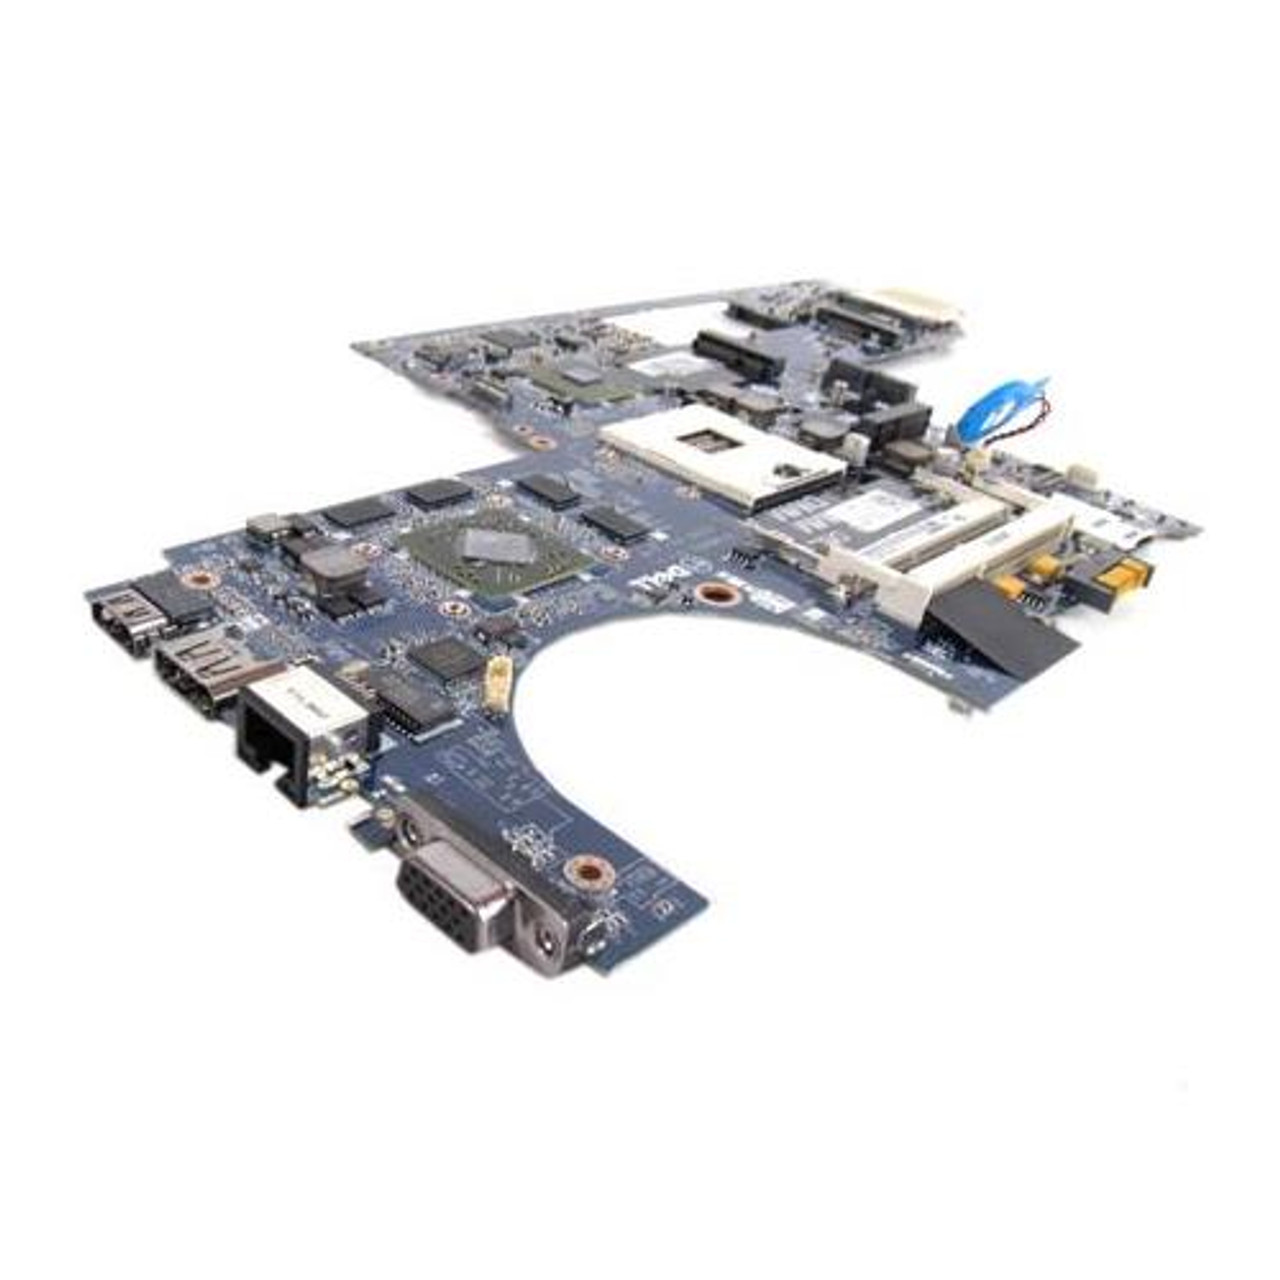 02RX9 - Dell System Board (Motherboard) for XPS 8300 (Refurbished)